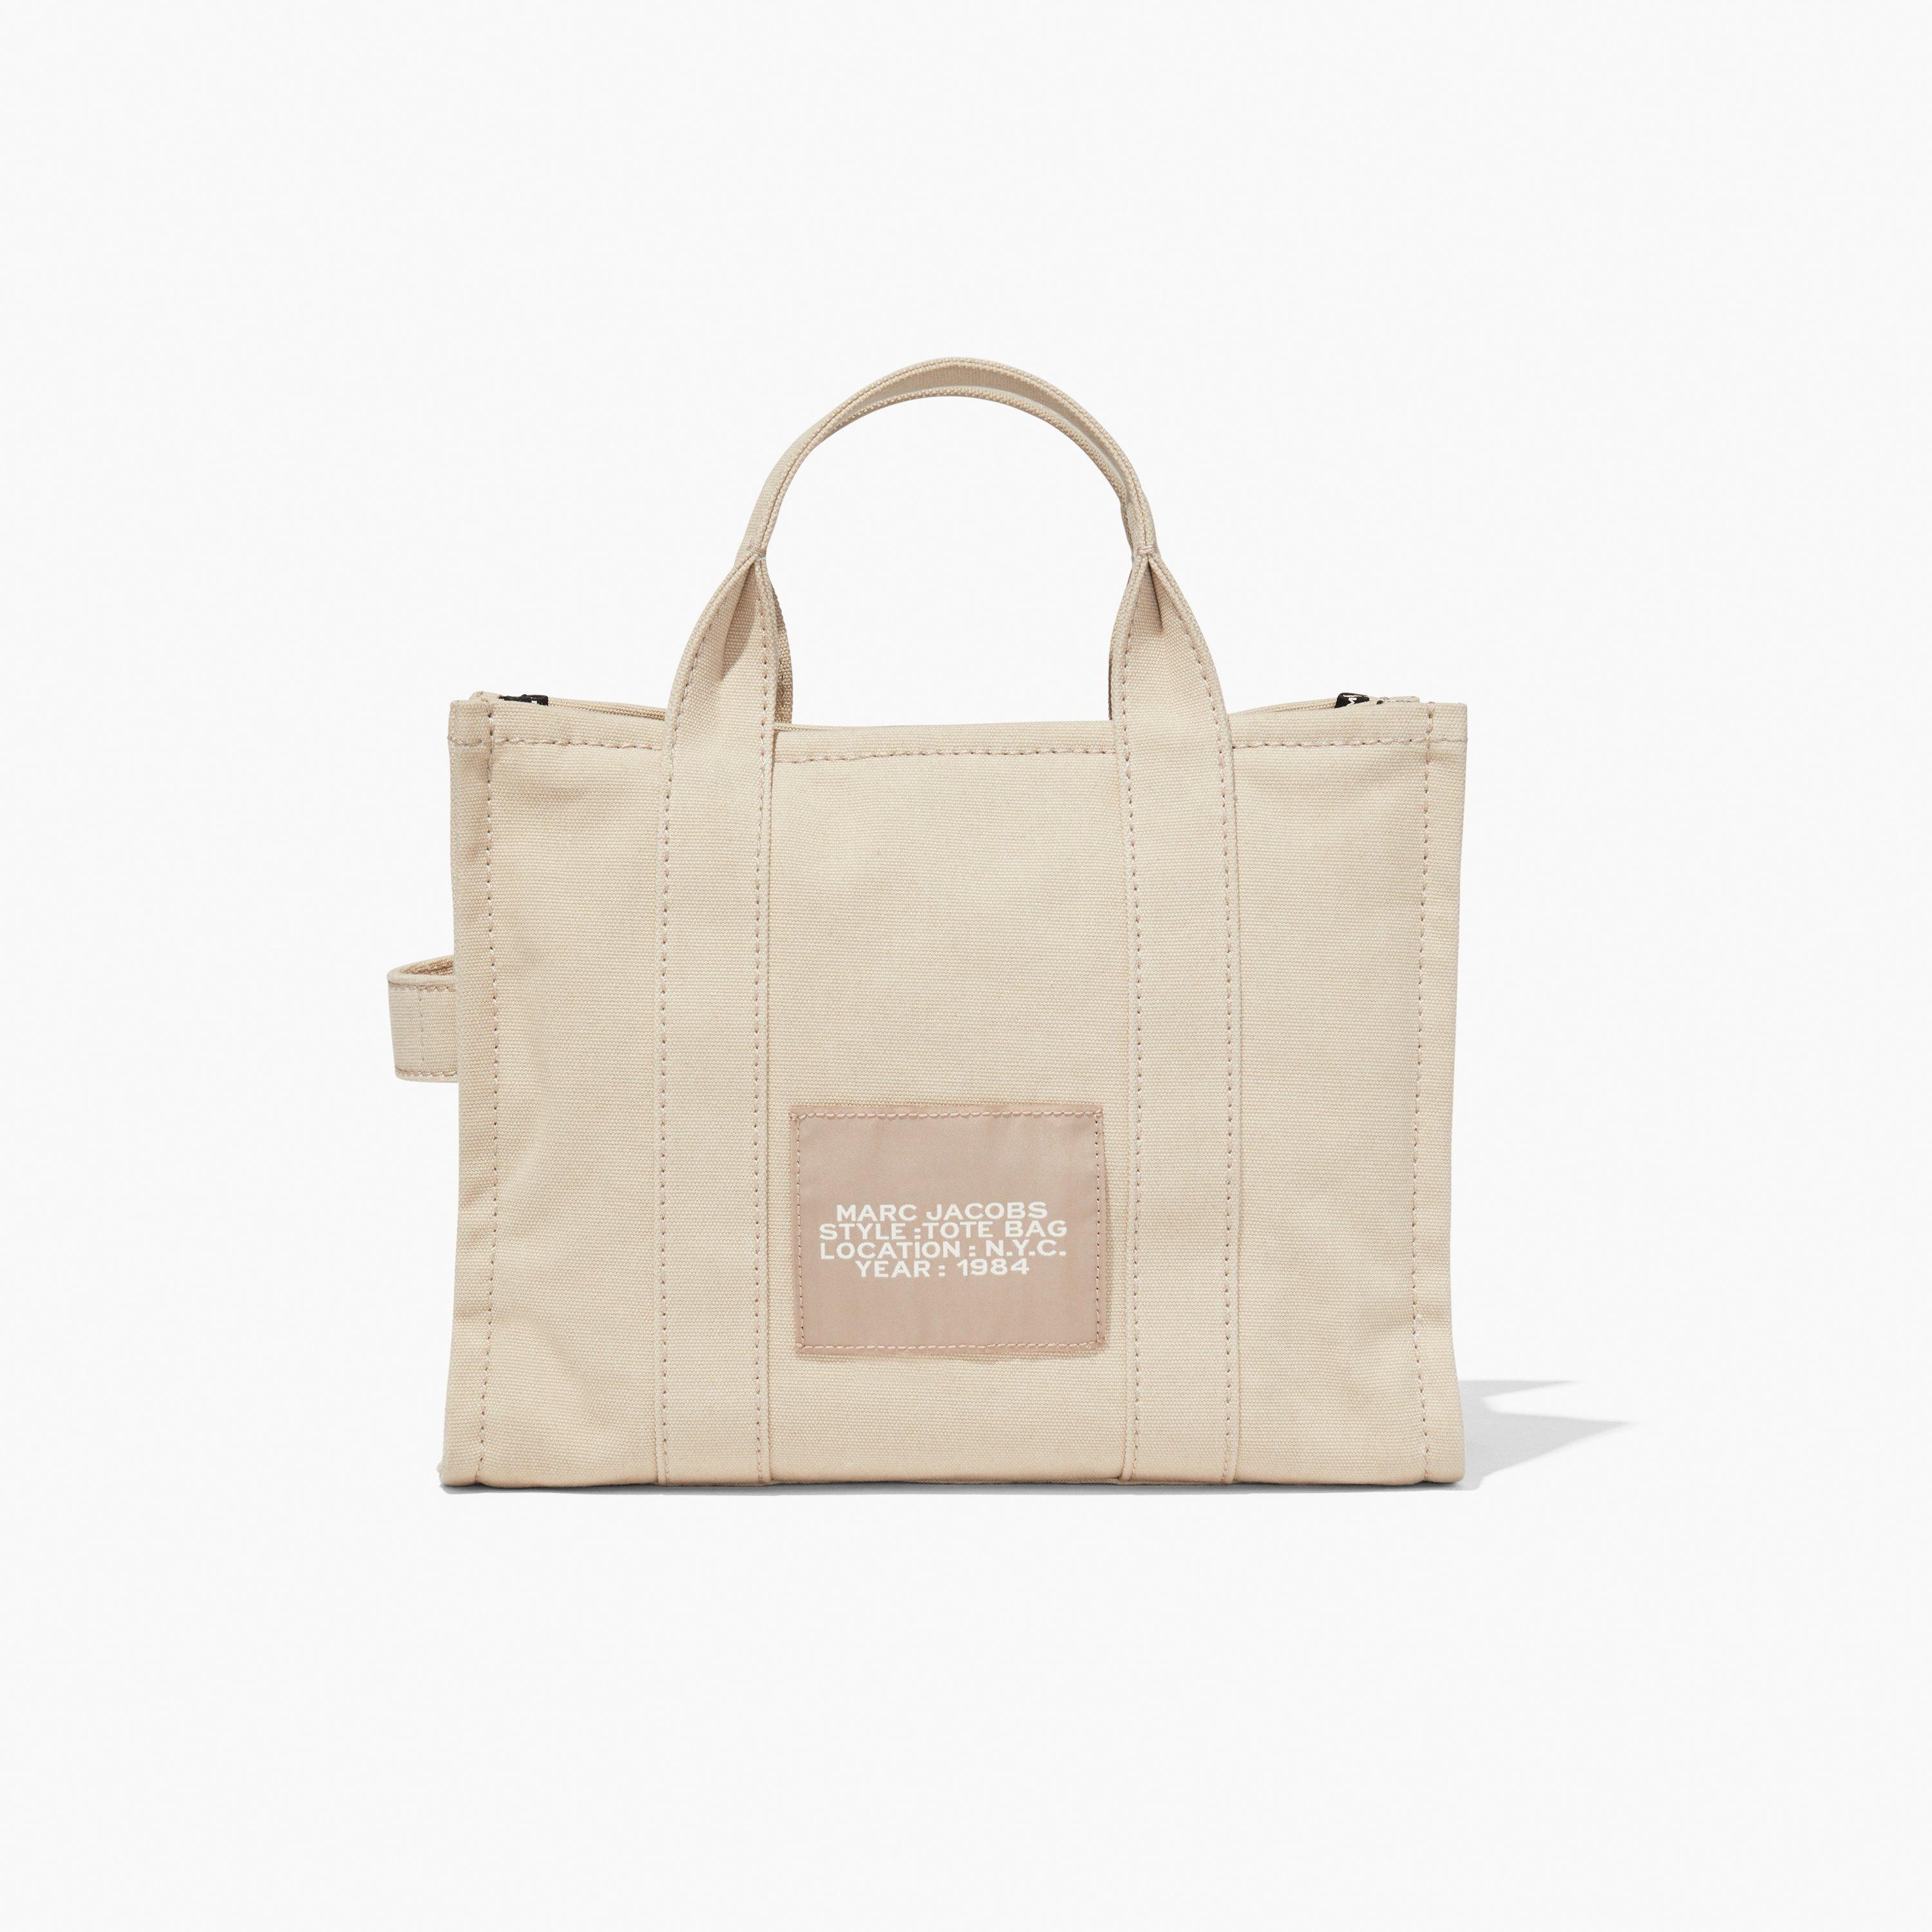 THE SMALL TOTE BAG - 6